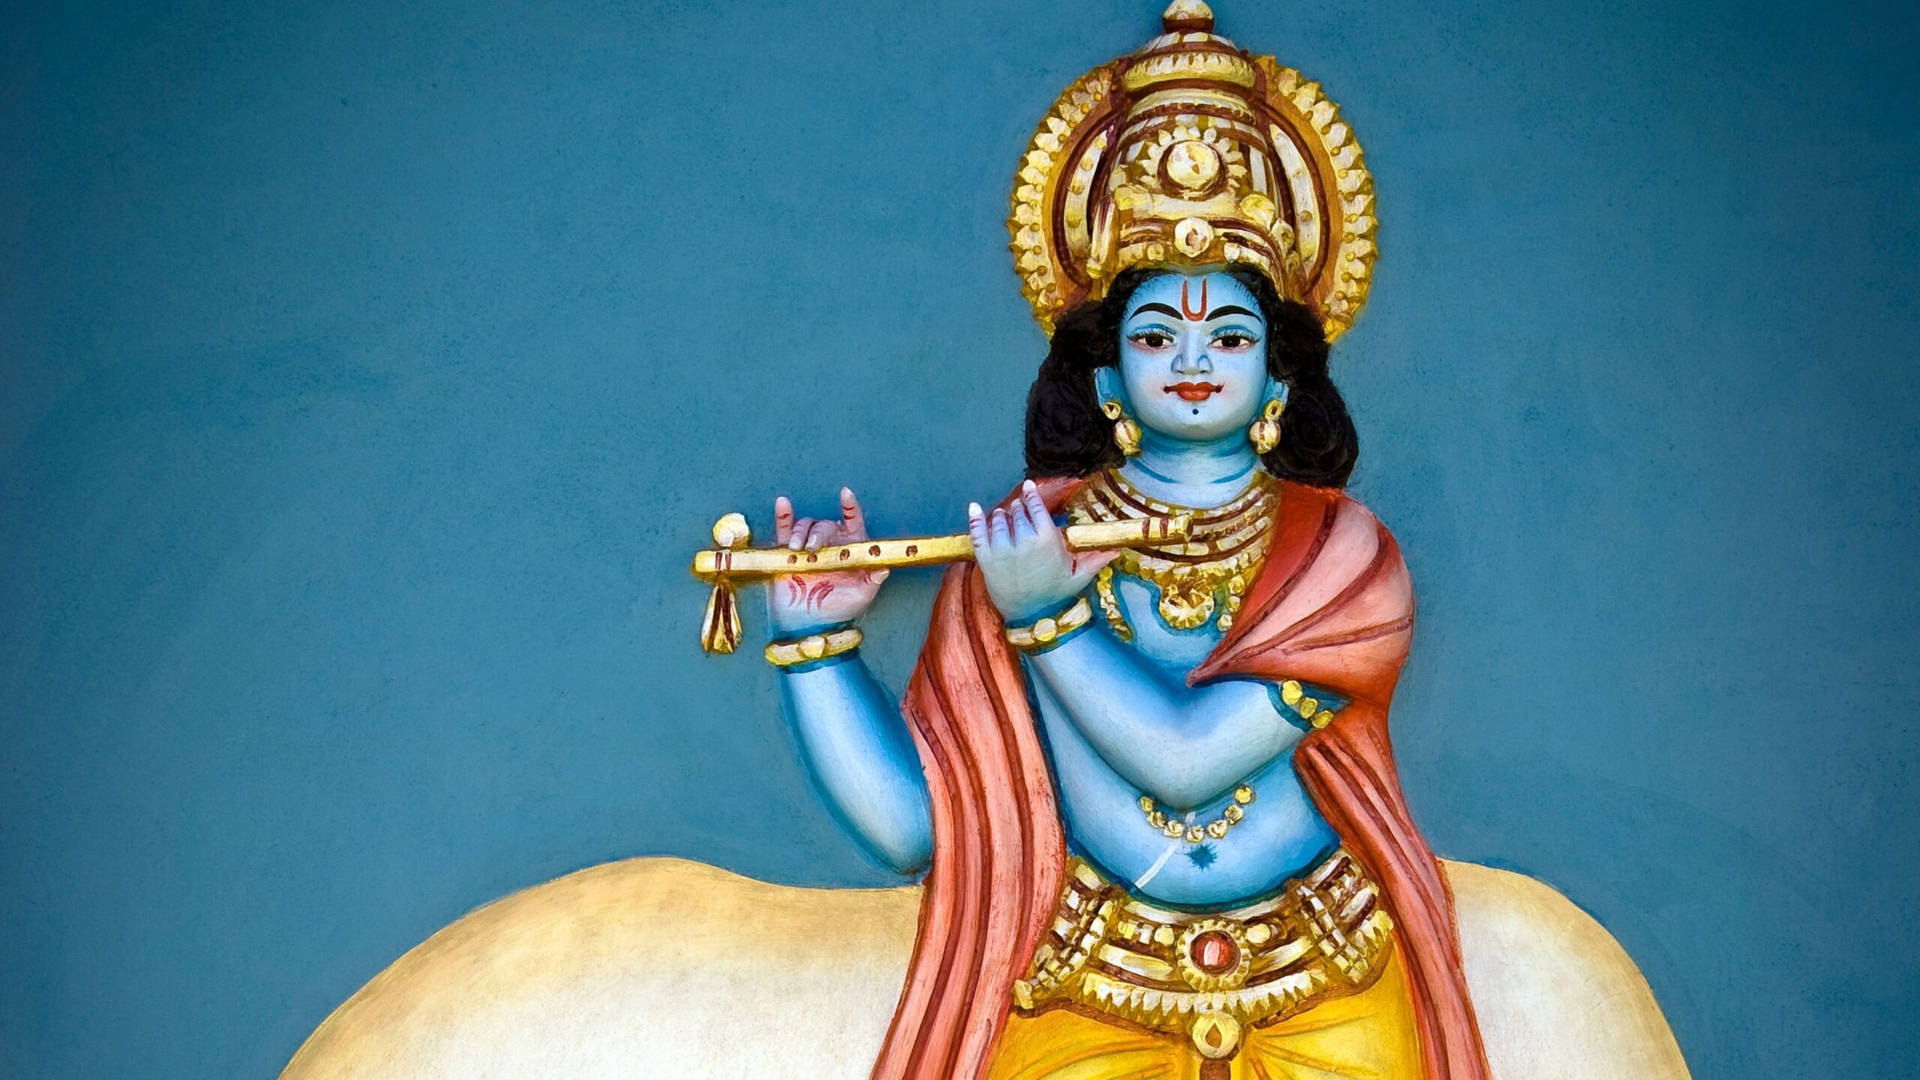 Painting Of Bal Krishna Playing The Flute Background